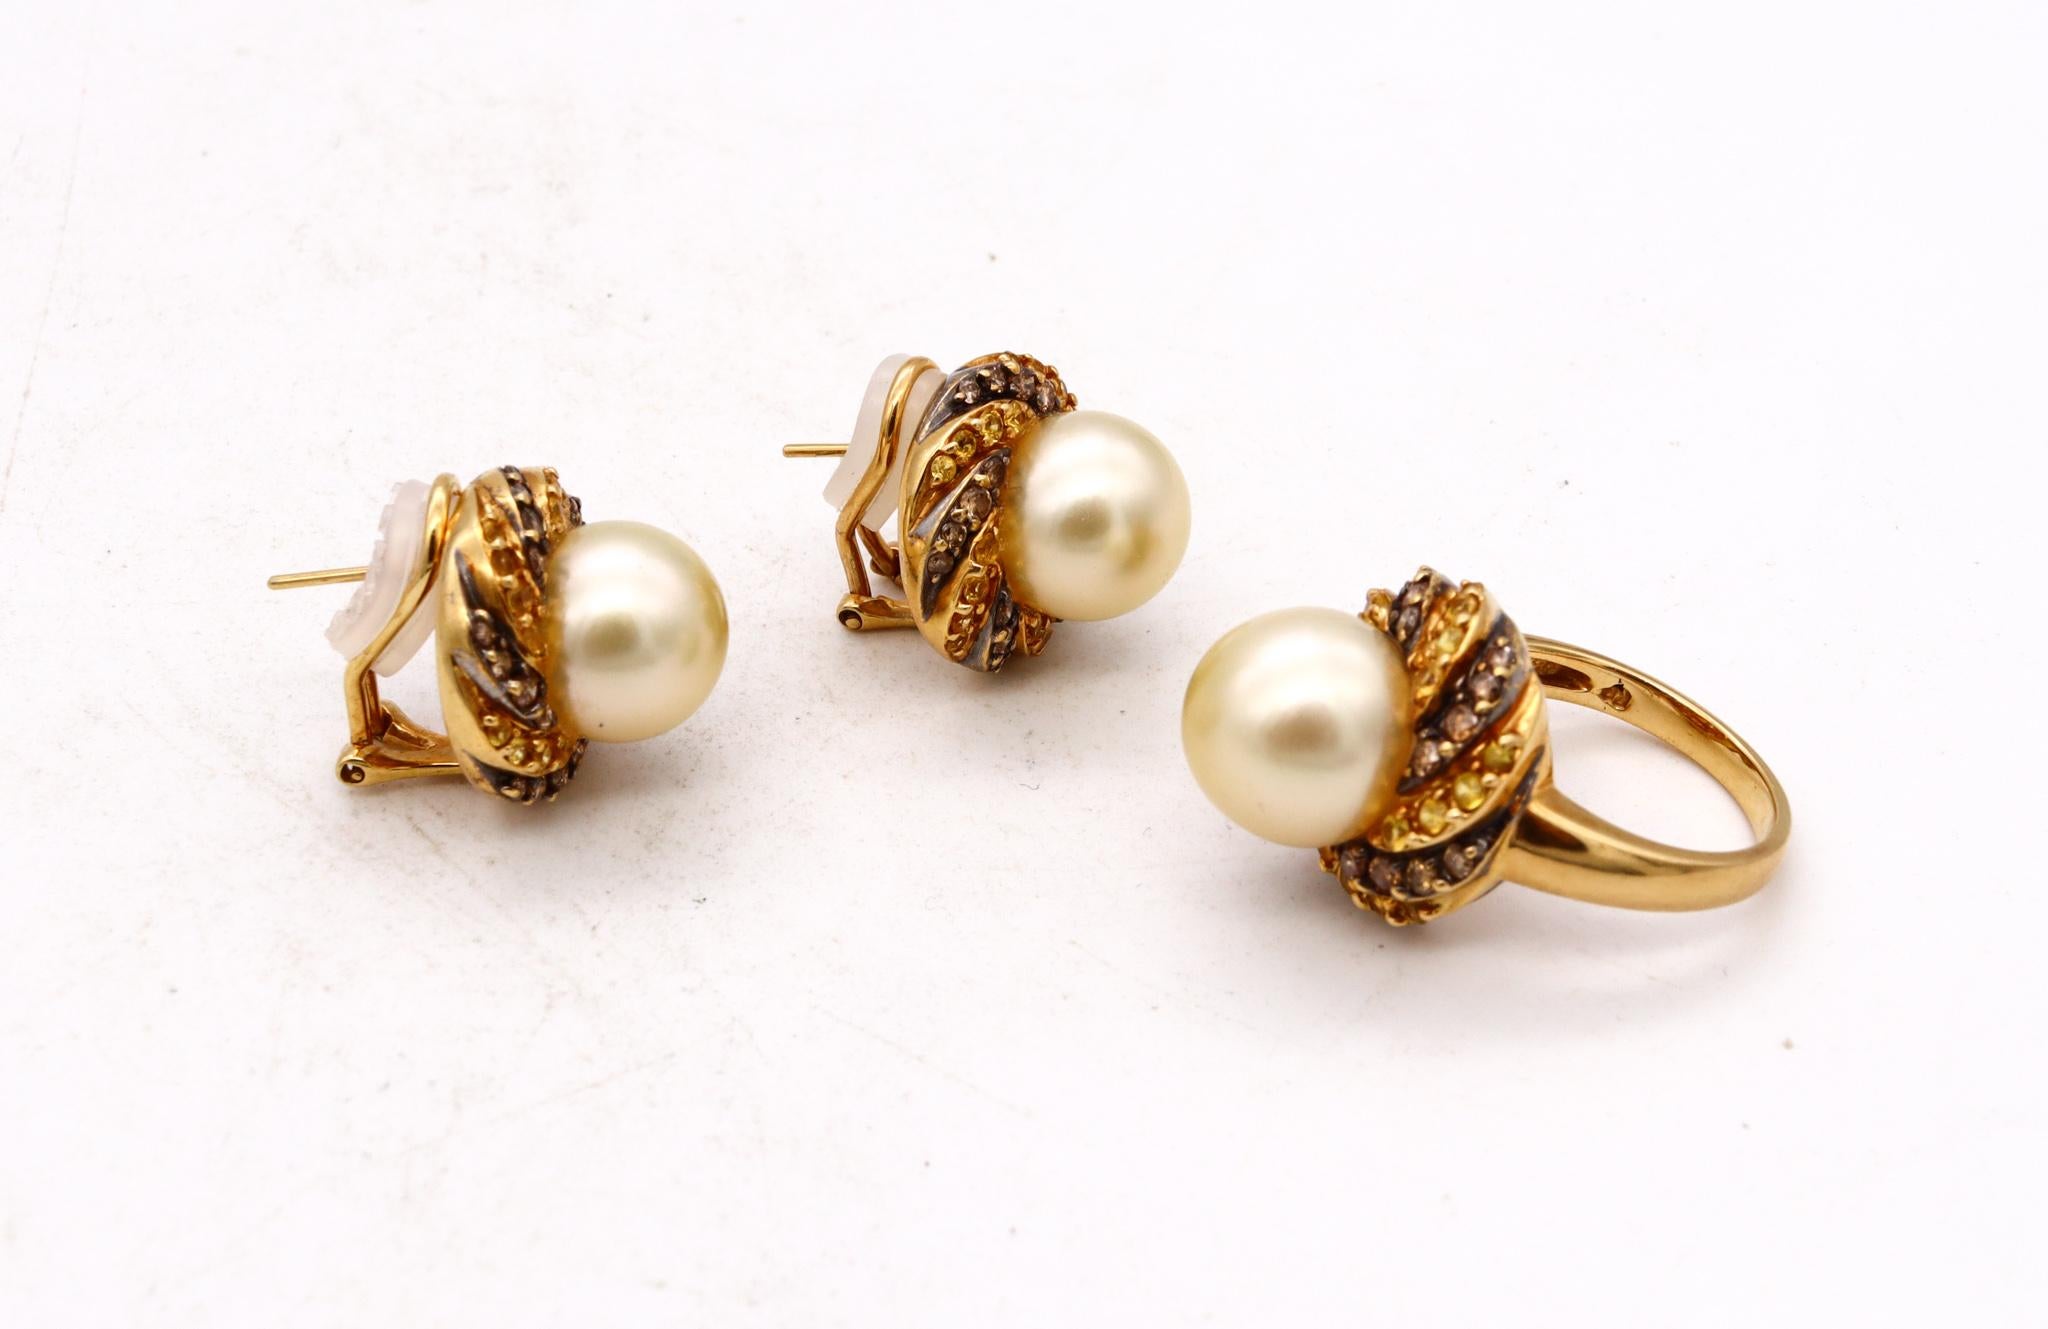 Italian Modern Suite in 18Kt Gold Akoya Pearls 4.20 Ctw Diamonds Sapphires For Sale 1